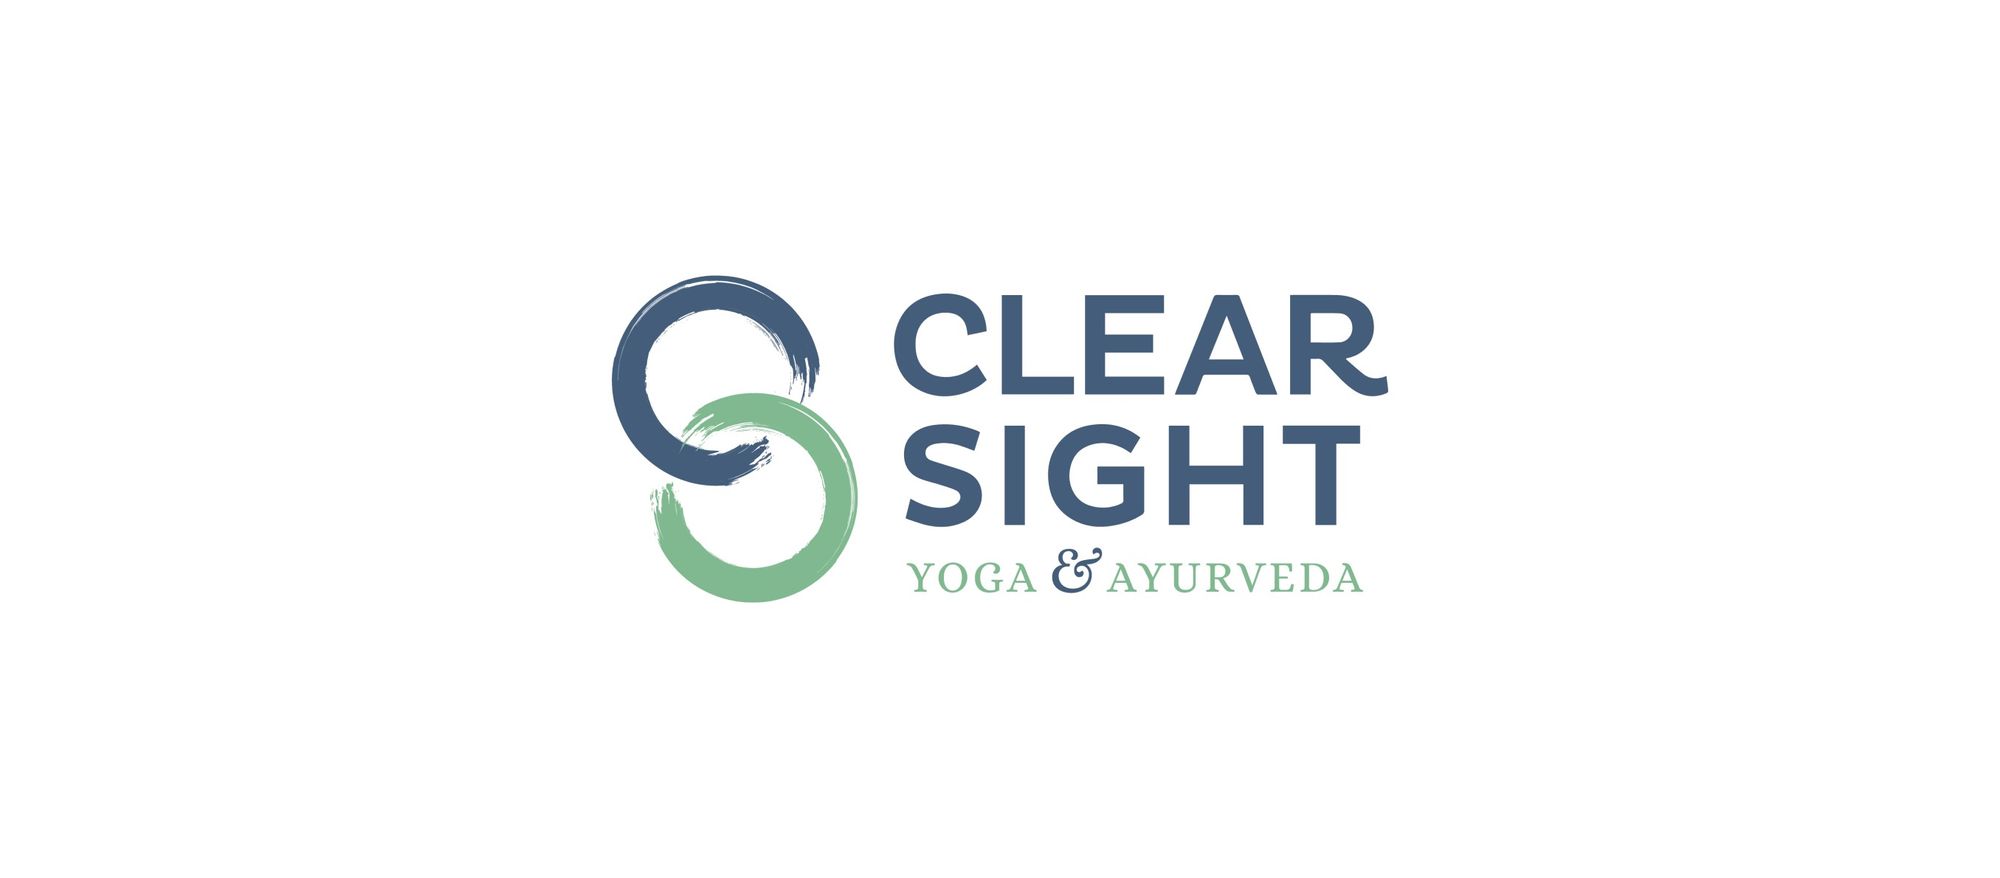 Breathe, Move and Live With Ease - Clear Sight Yoga